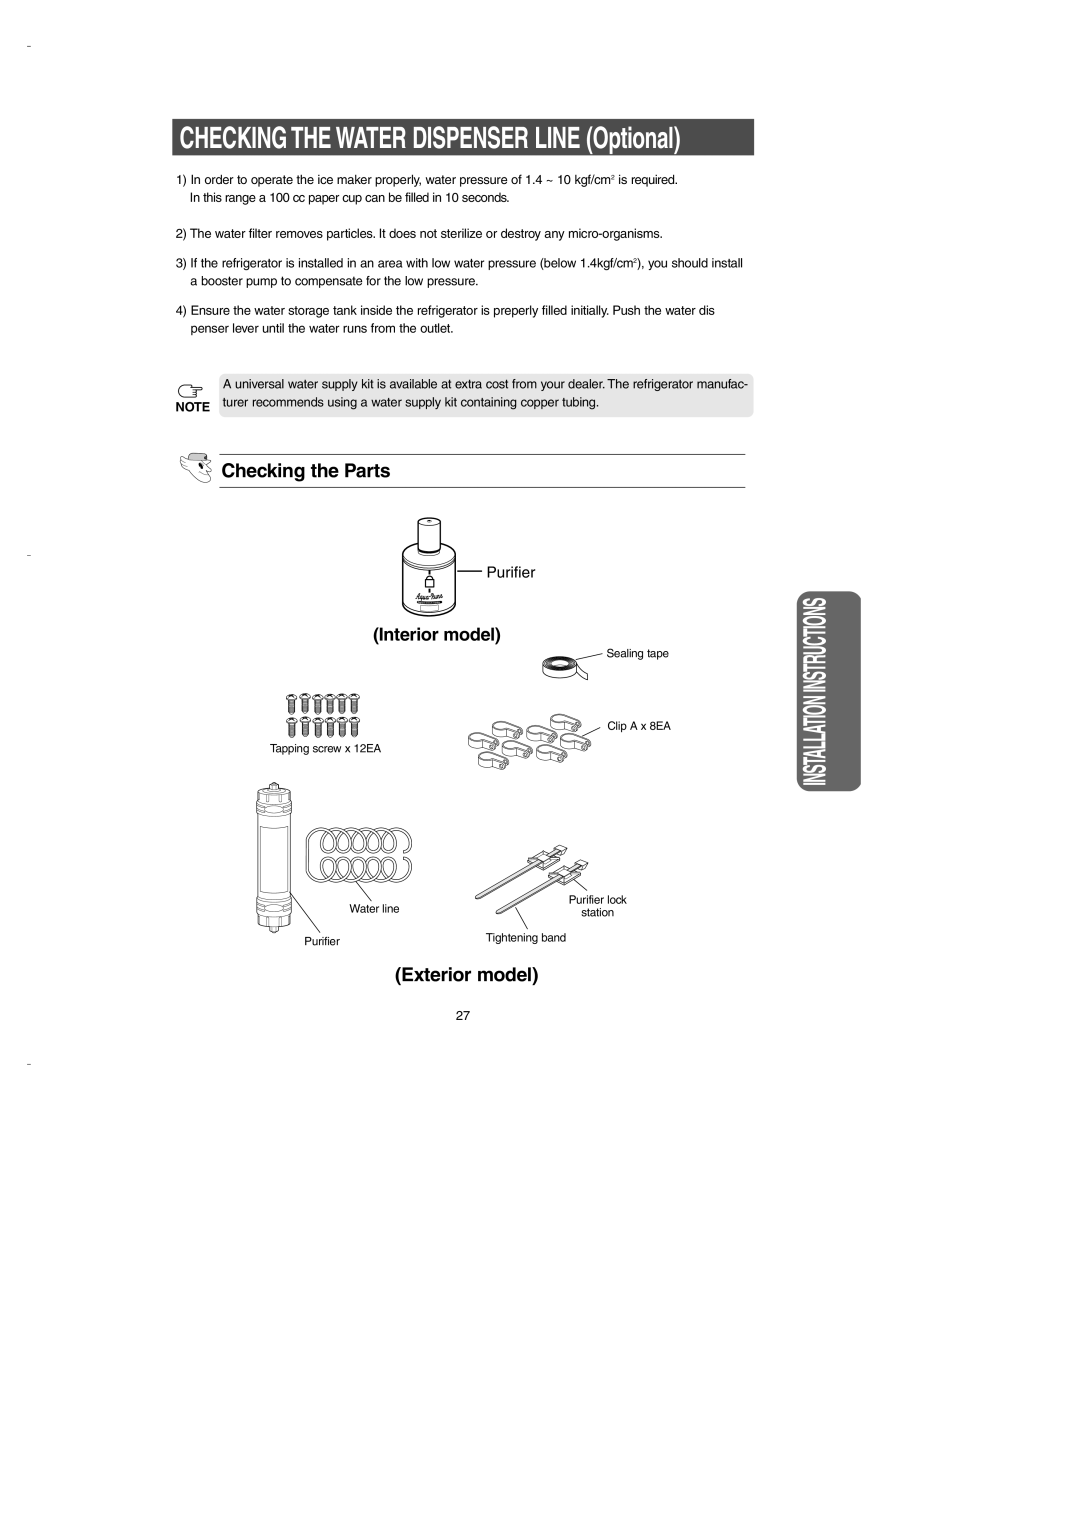 Samsung DA99-00275B owner manual Checking the Parts, Exterior model, Purifier, CHECKING THE WATER DISPENSER LINE Optional 